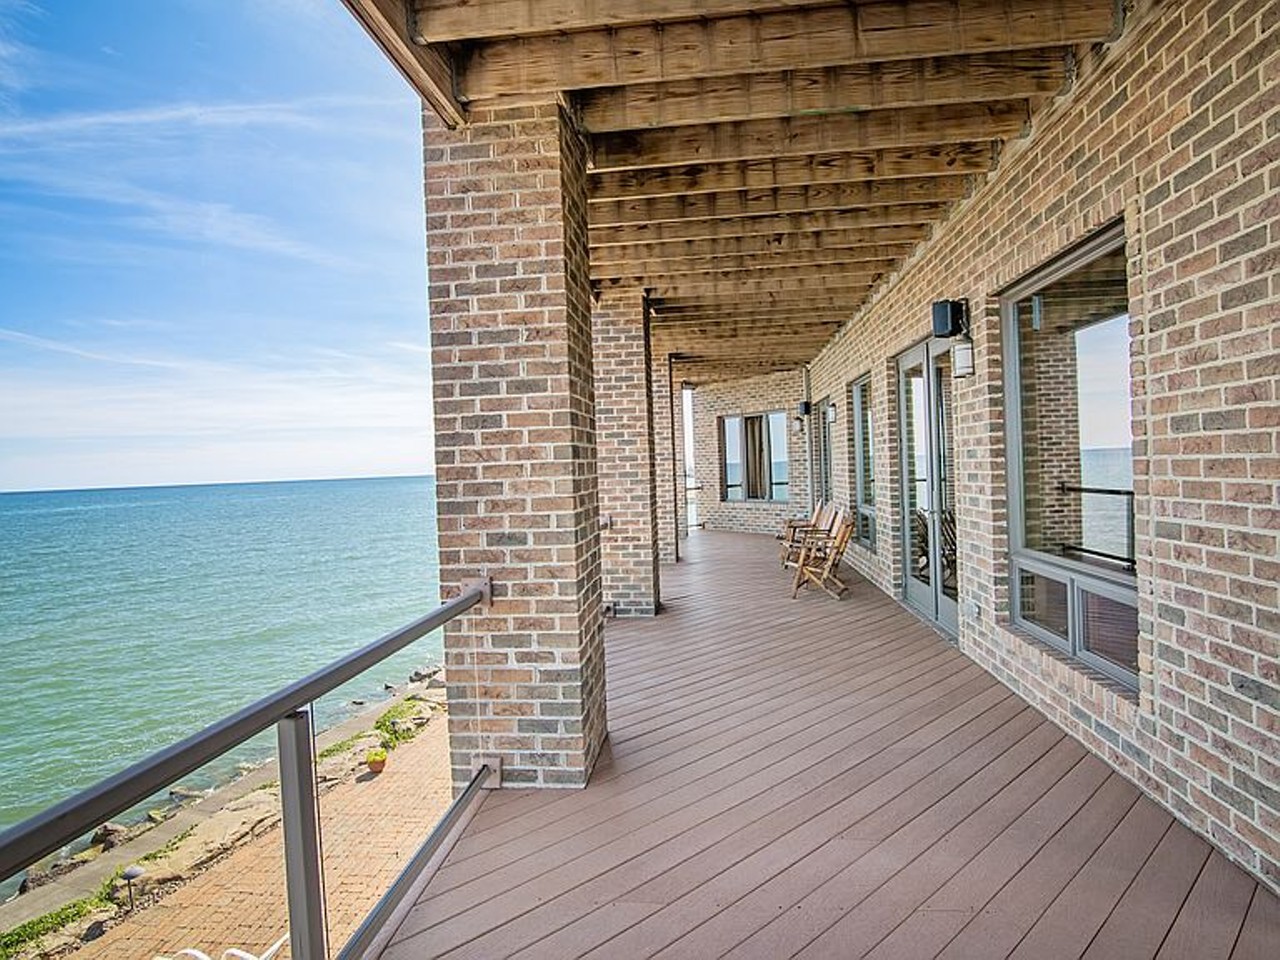 Get Your Own Private Beach and Decorative Gondola With This $1.5 Million Avon Lake Mansion